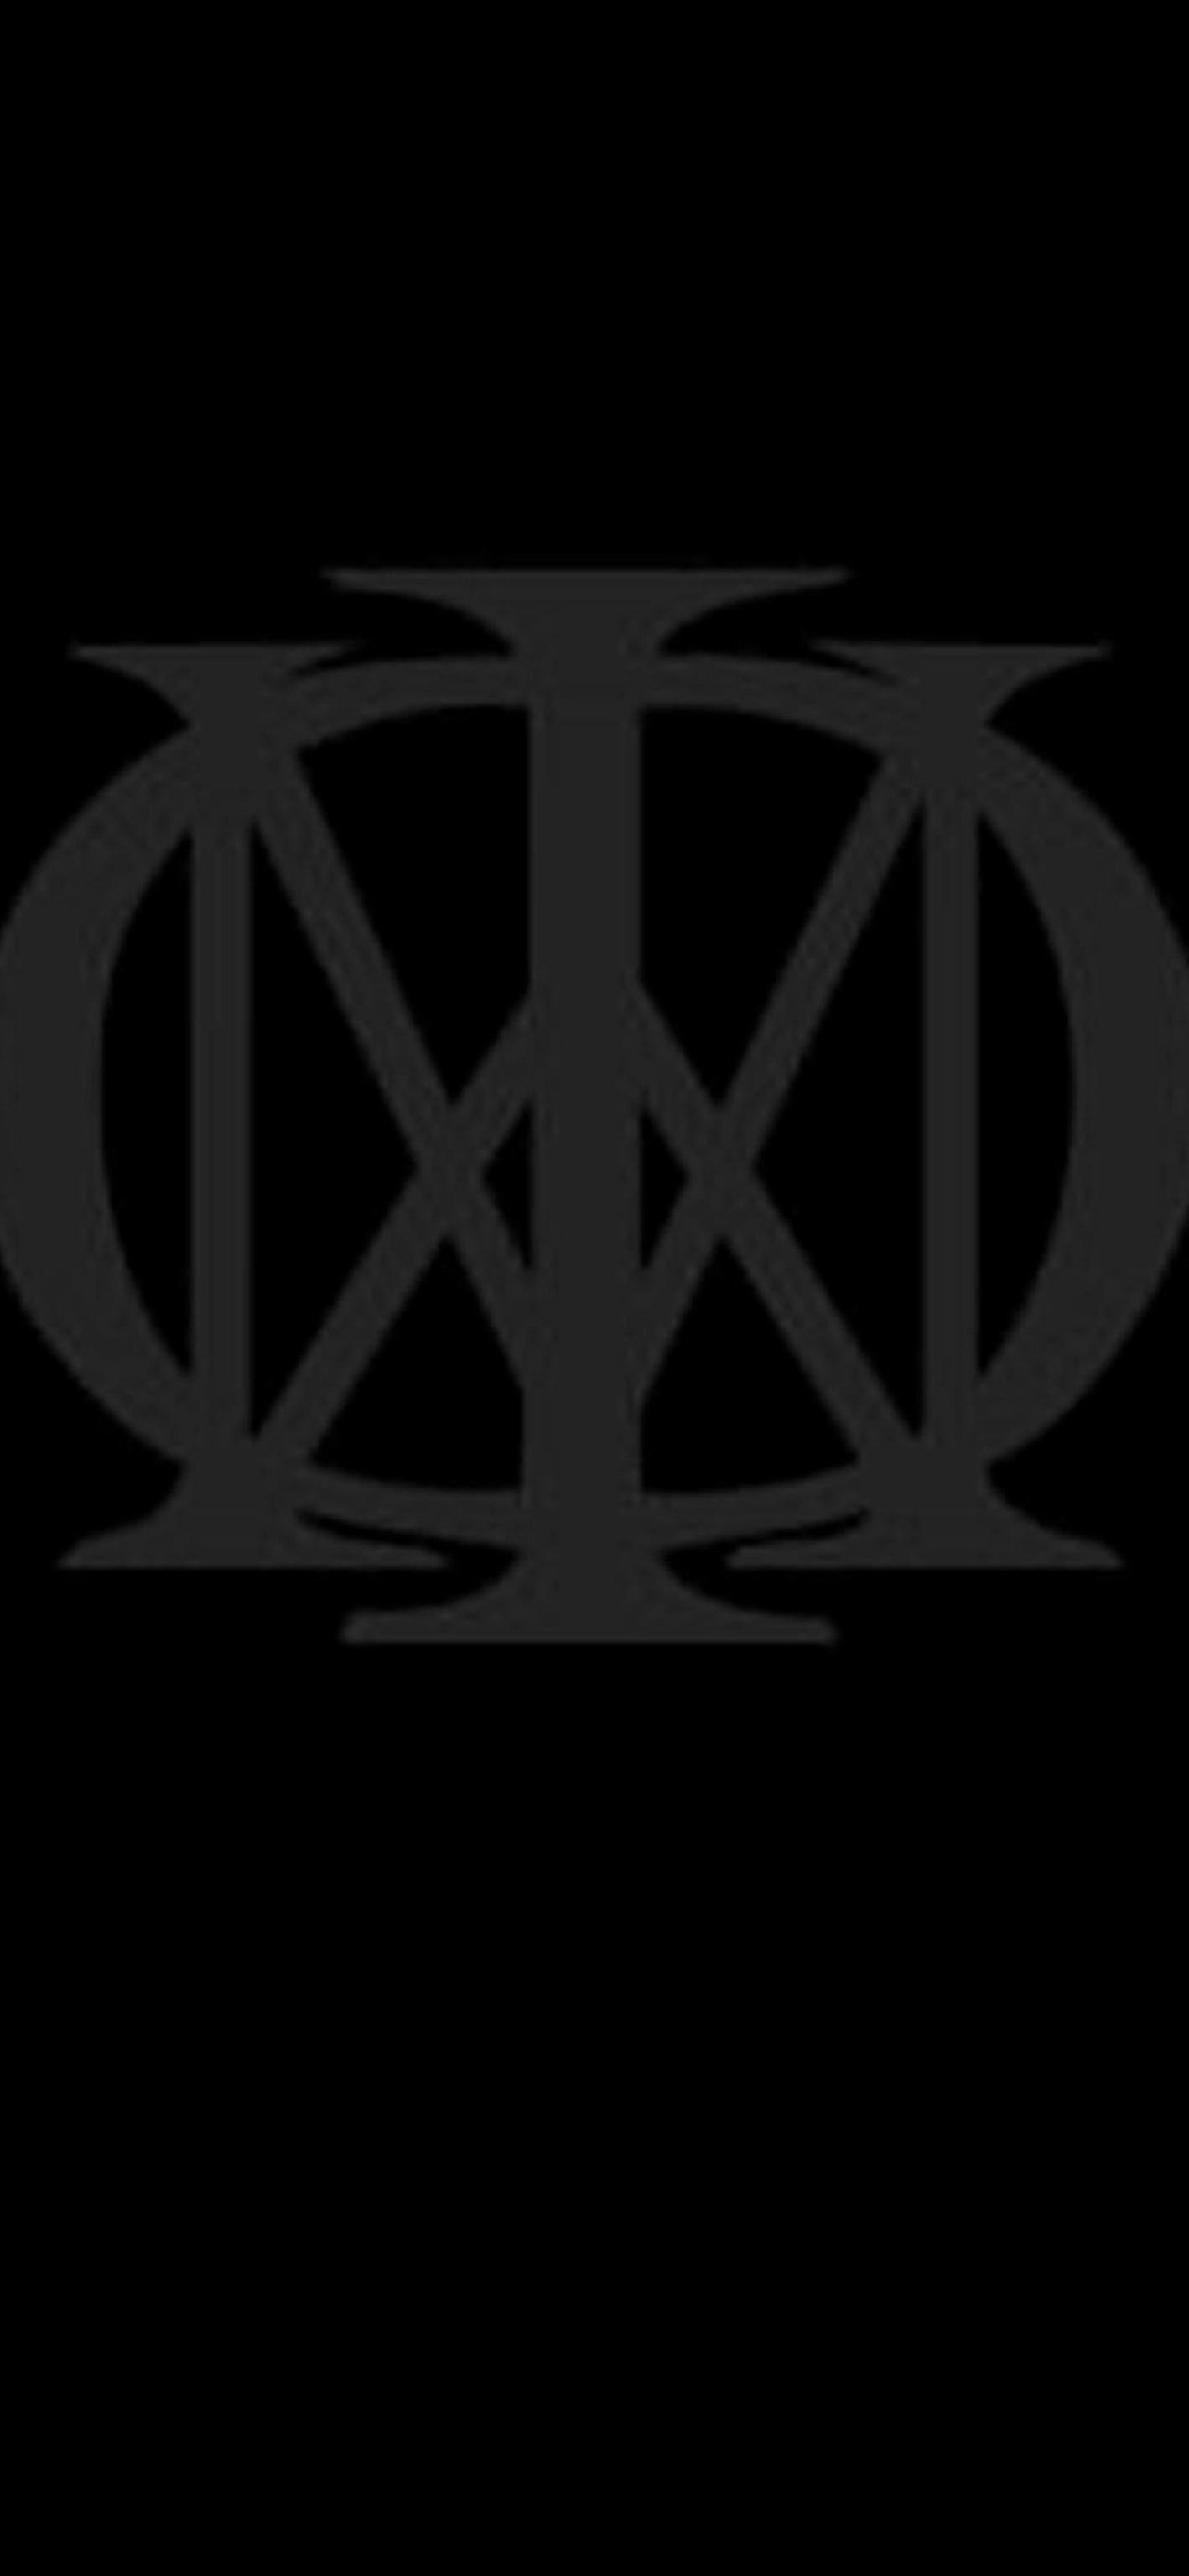 Dream Theater logo, iPhone wallpapers, Backgrounds, 1420x3080 HD Phone